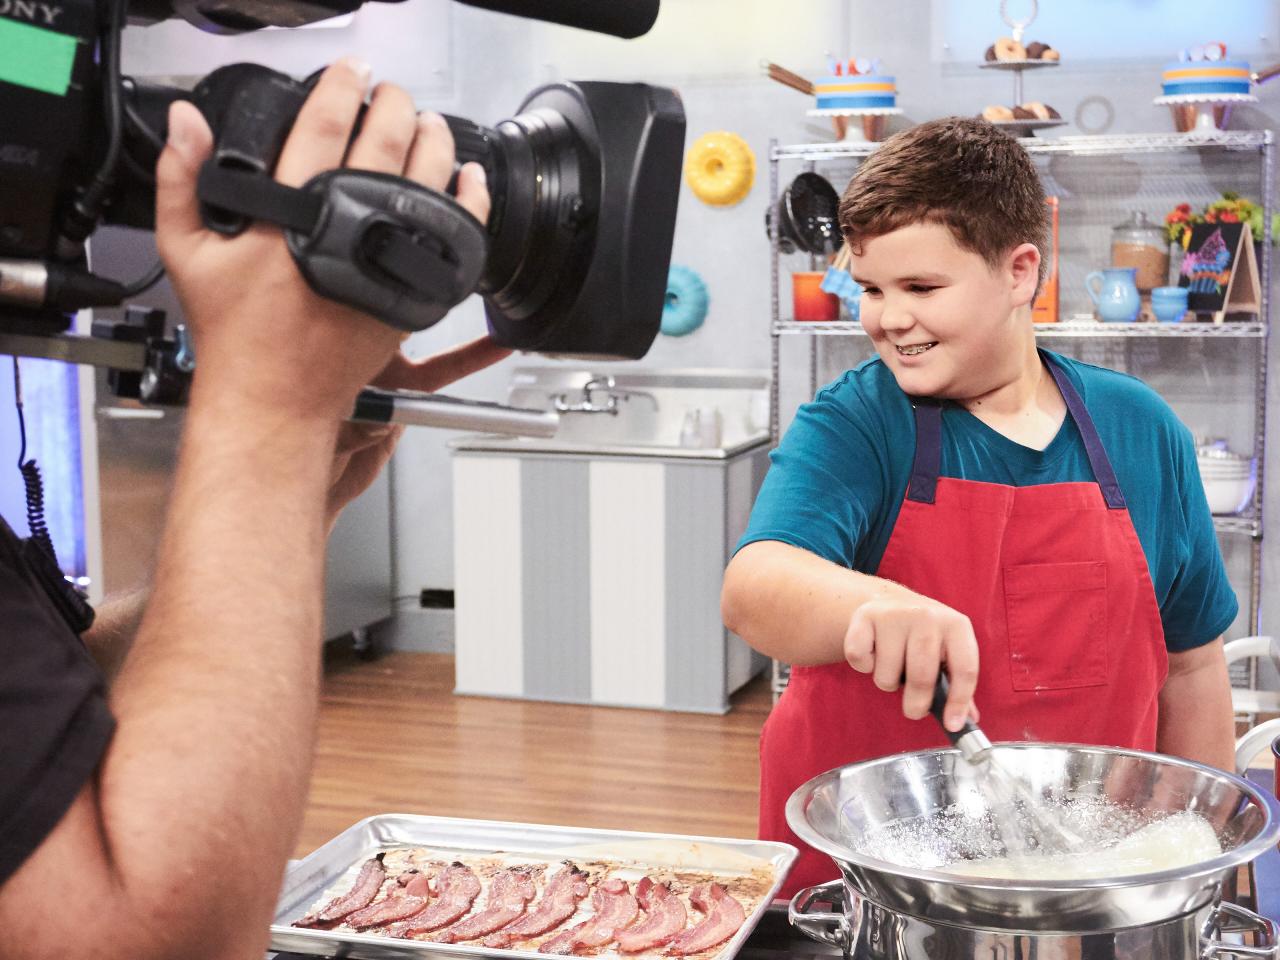 The Untold Truth Of Kids Baking Championship